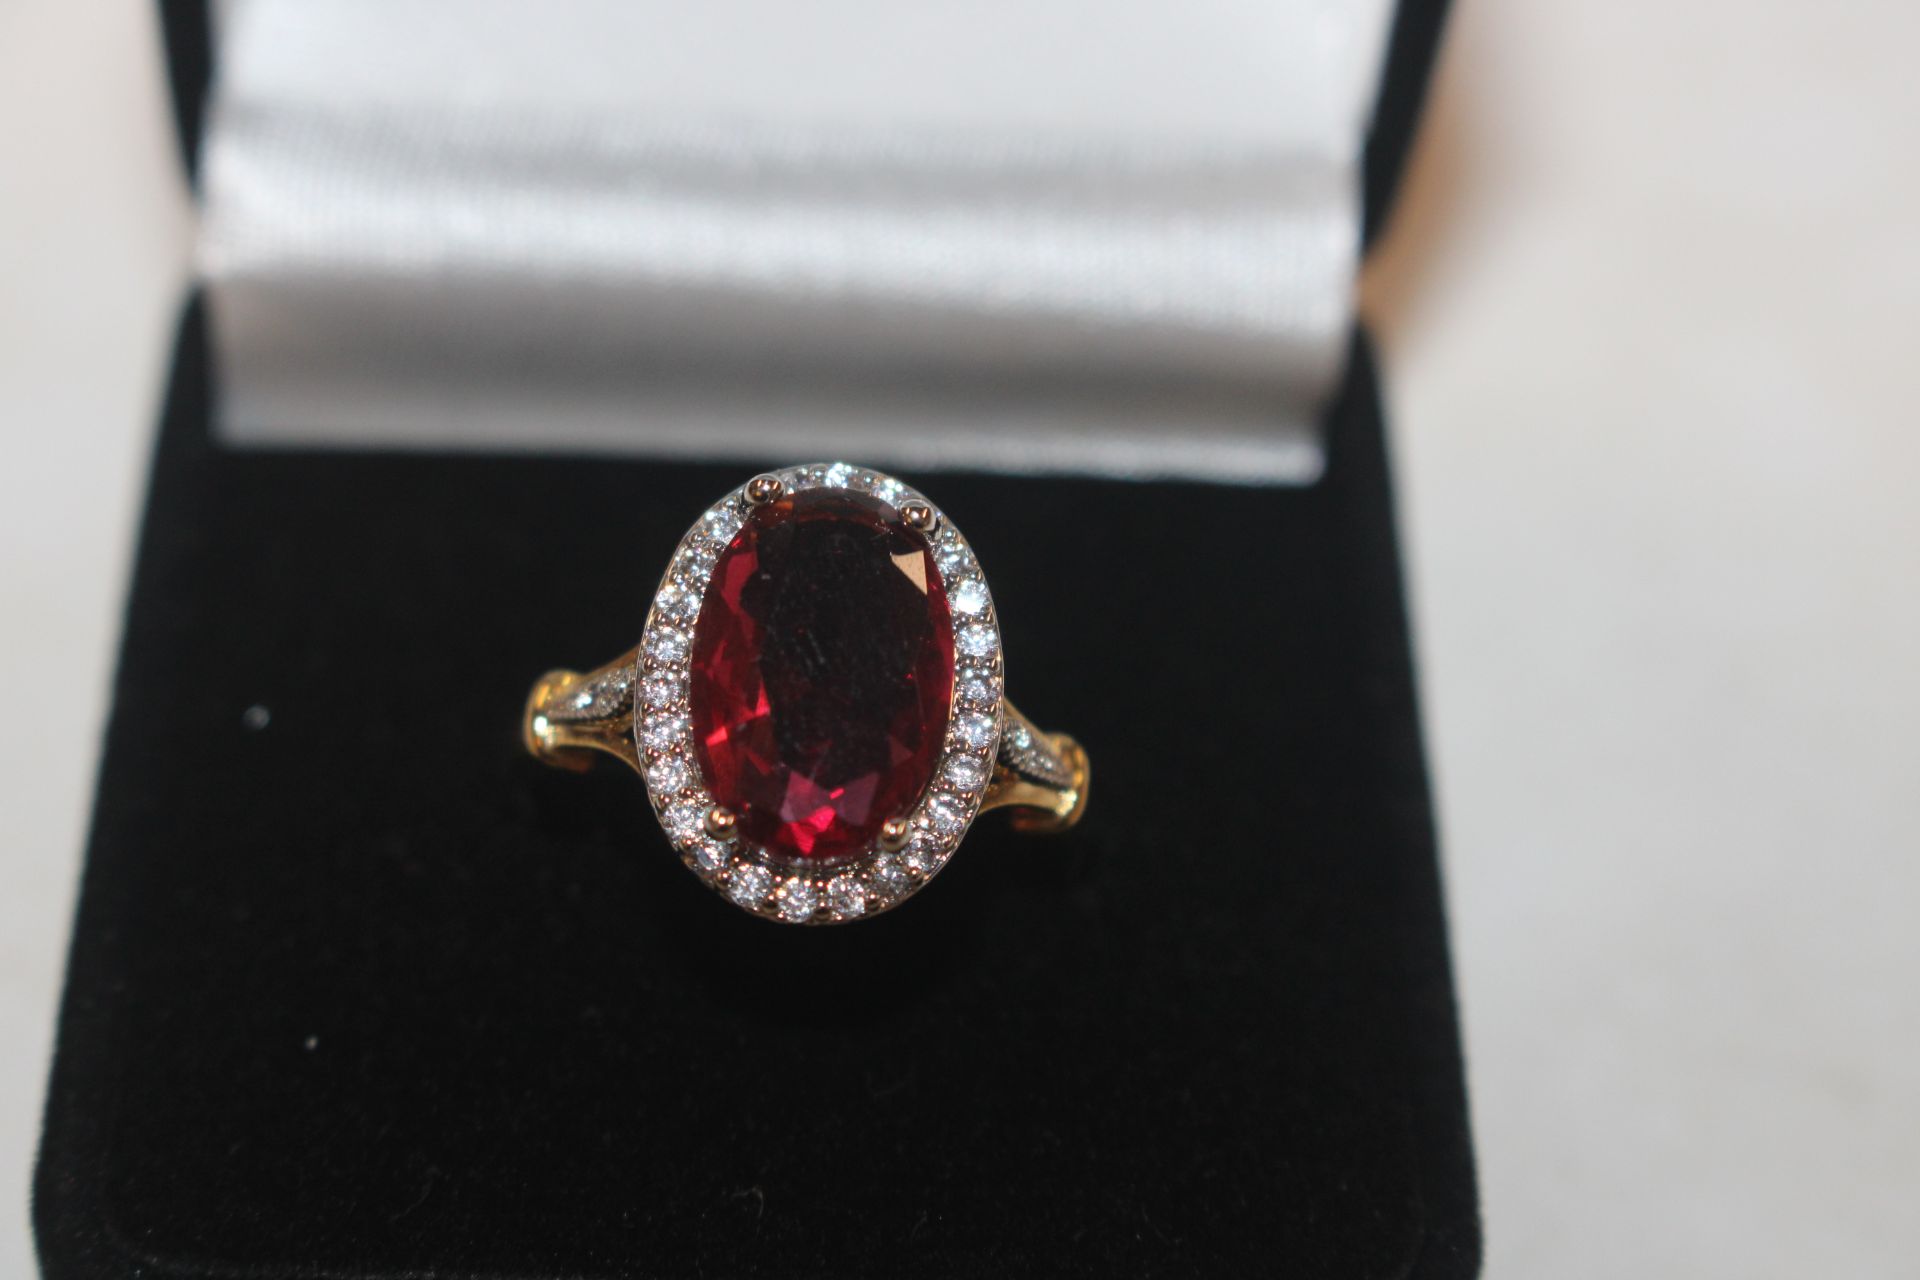 A 925 silver gilt ring set with ruby coloured ston - Image 2 of 4